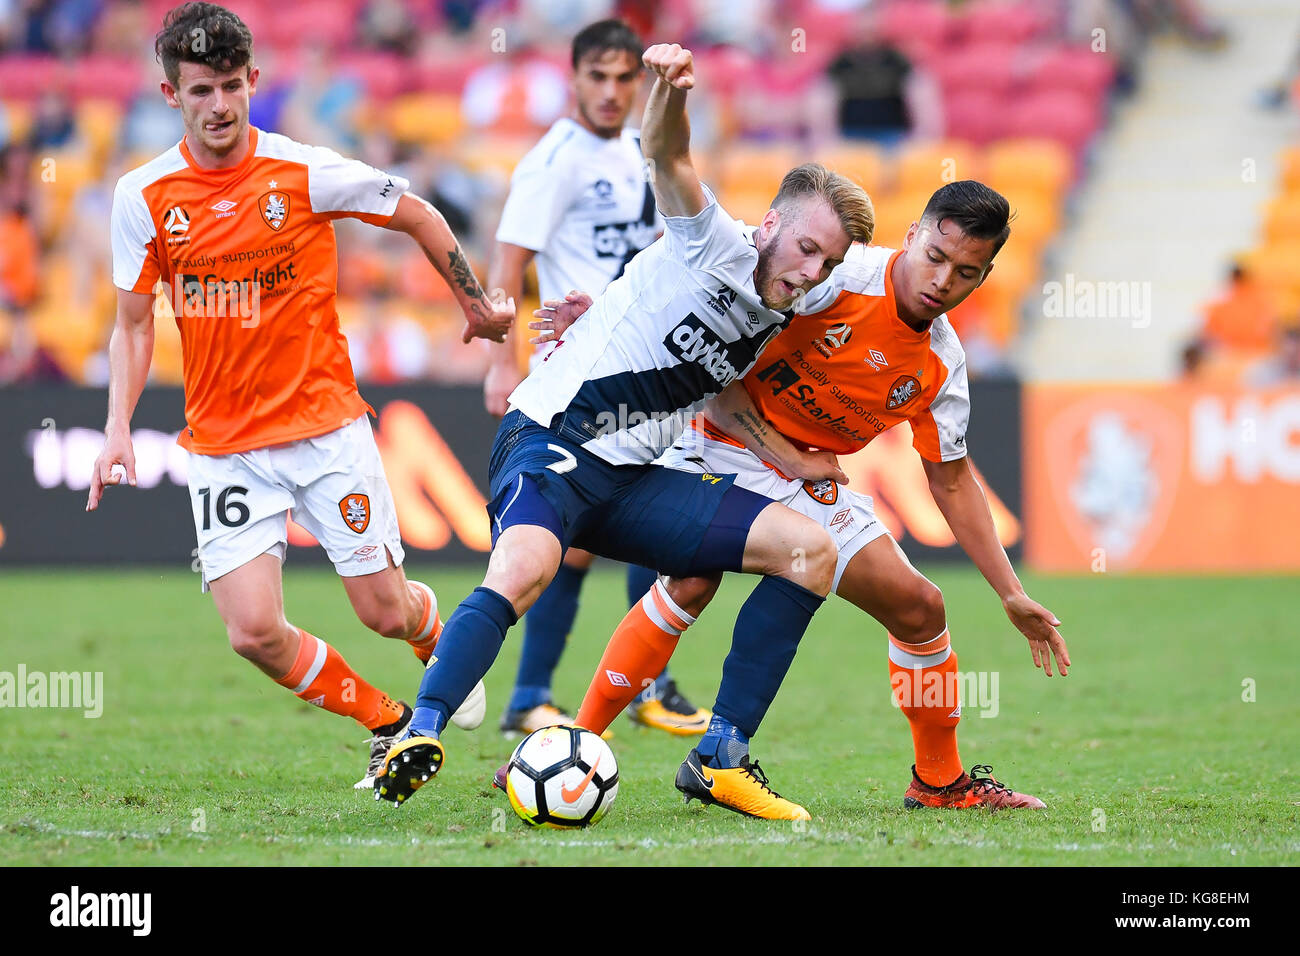 Brisbane, QUEENSLAND, AUSTRALIA. 5th Nov, 2017. Andrew Hoole of the Mariners (#7, left) and Dane Ingham of the Roar (#2) compete for the ball during the round five Hyundai A-League match between the Brisbane Roar and the Central Coast Mariners at Suncorp Stadium on November 5, 2017 in Brisbane, Australia. Credit: Albert Perez/ZUMA Wire/Alamy Live News Stock Photo